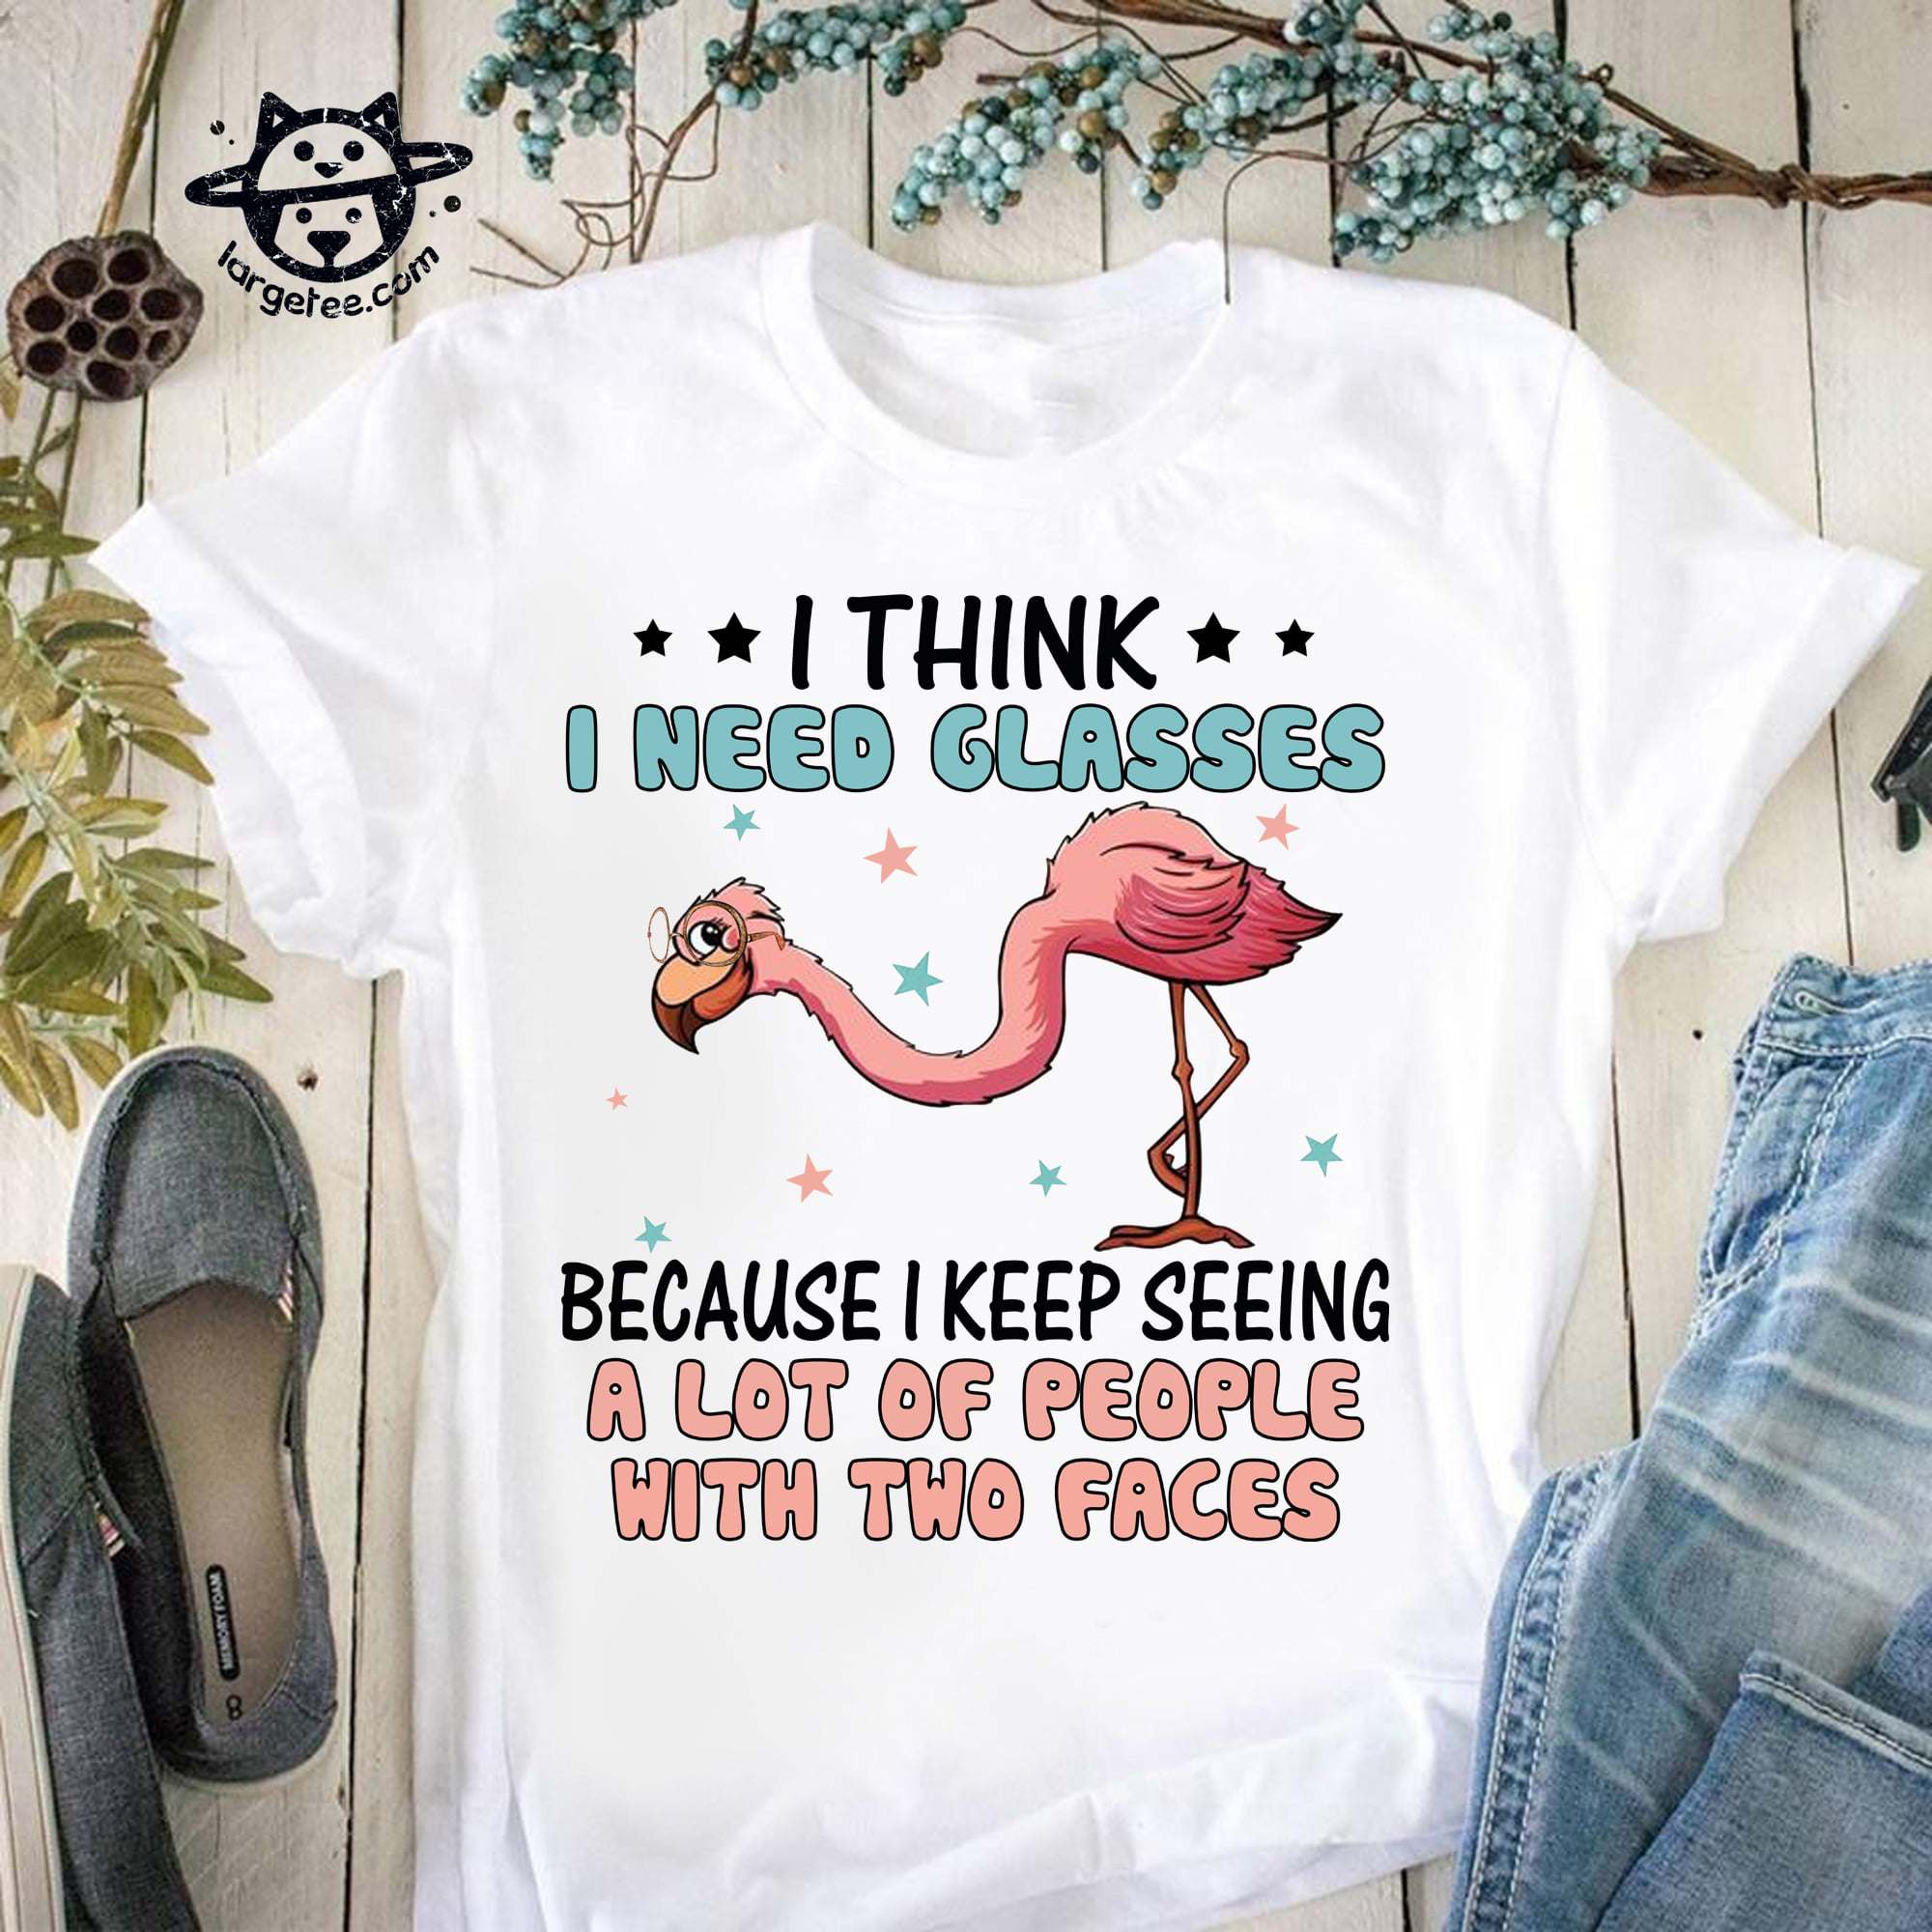 I think I need glasses because I keep seeing a lot of people with two faces - Flamingo with glasses